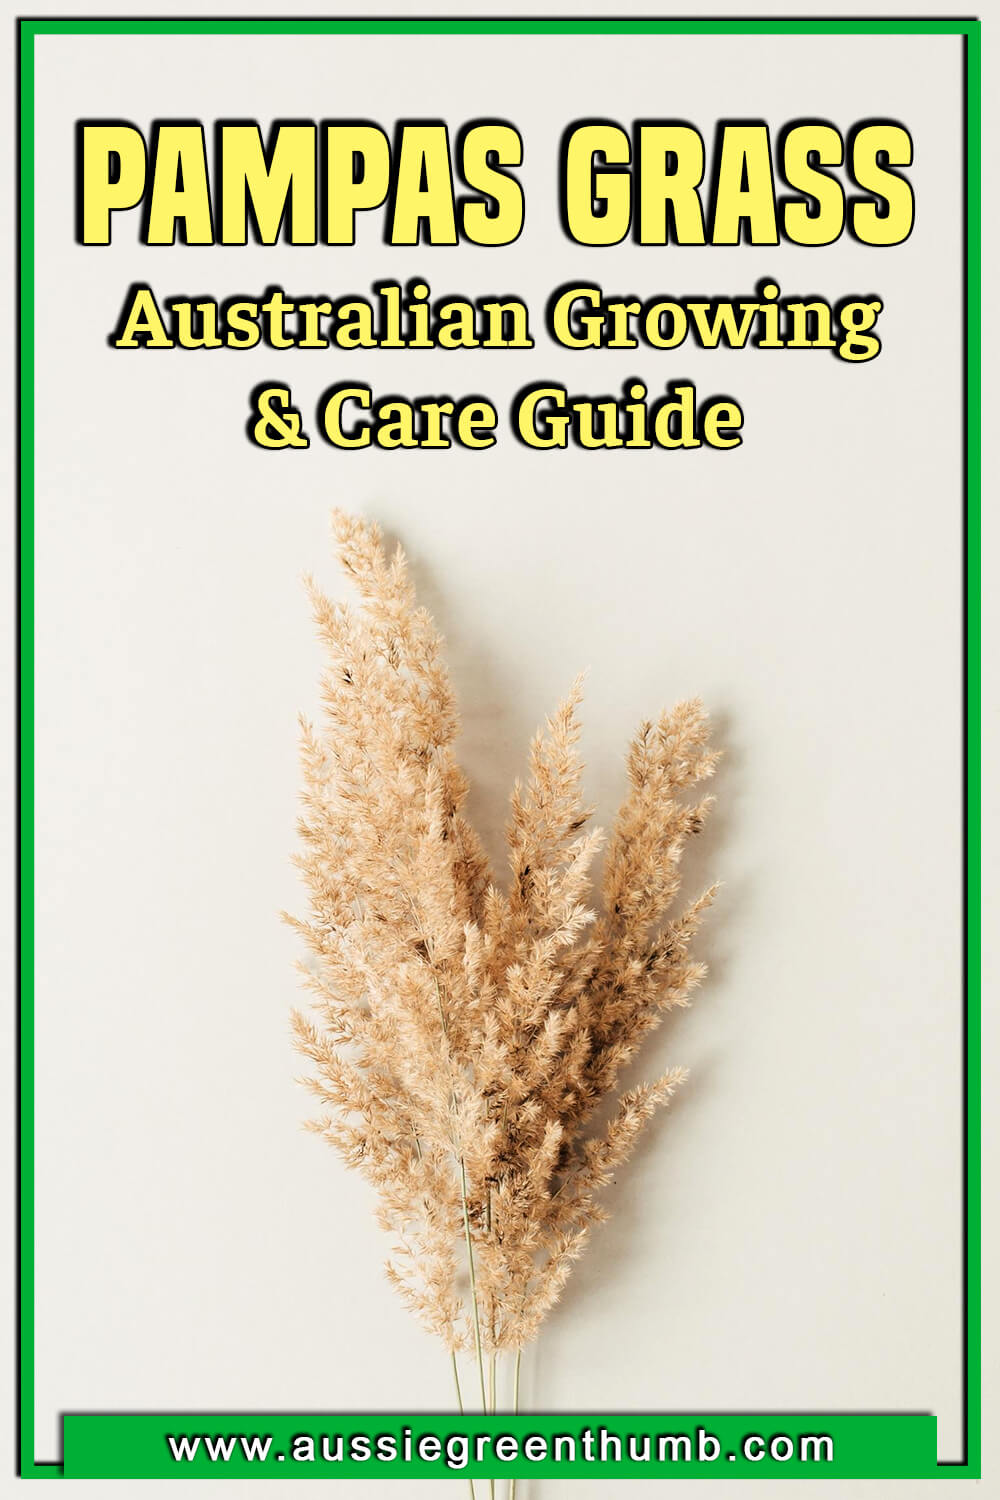 Pampas Grass Australian Growing and Care Guide